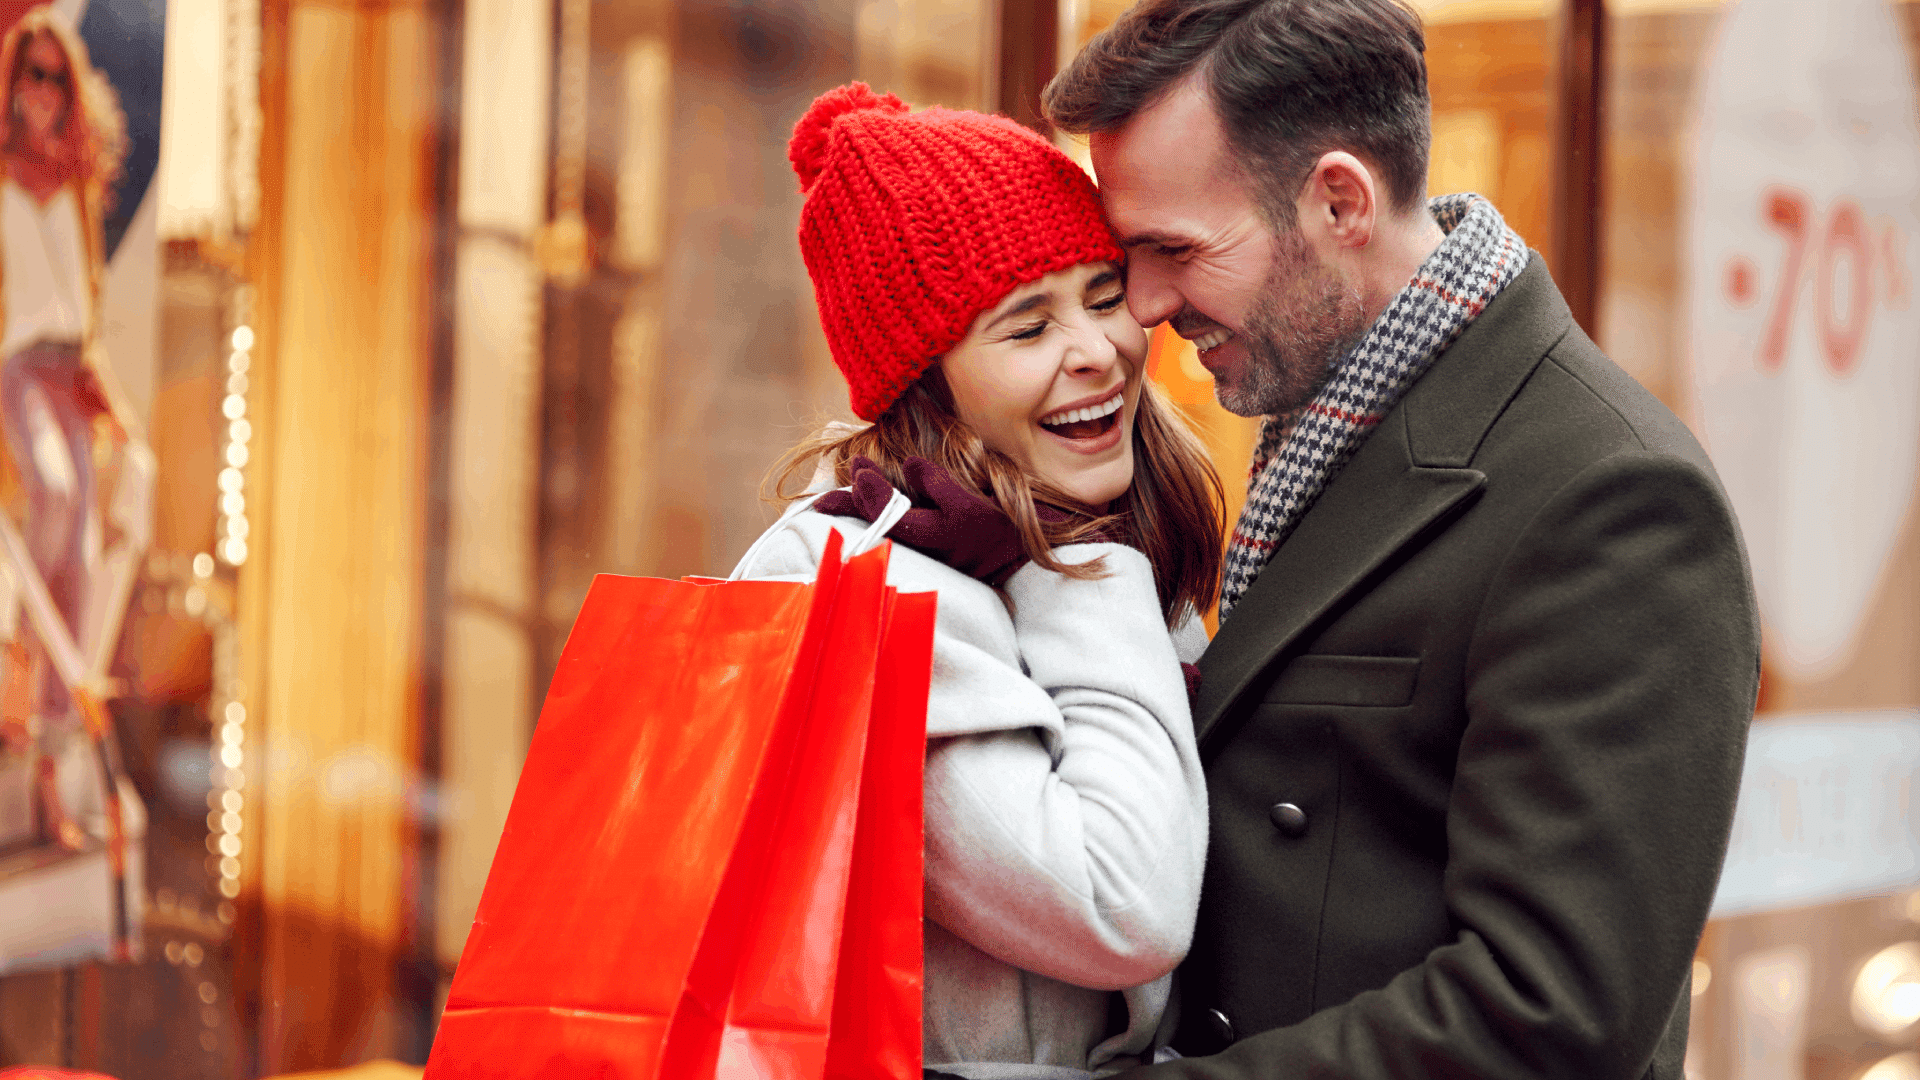 A young couple Christmas shopping & laughing